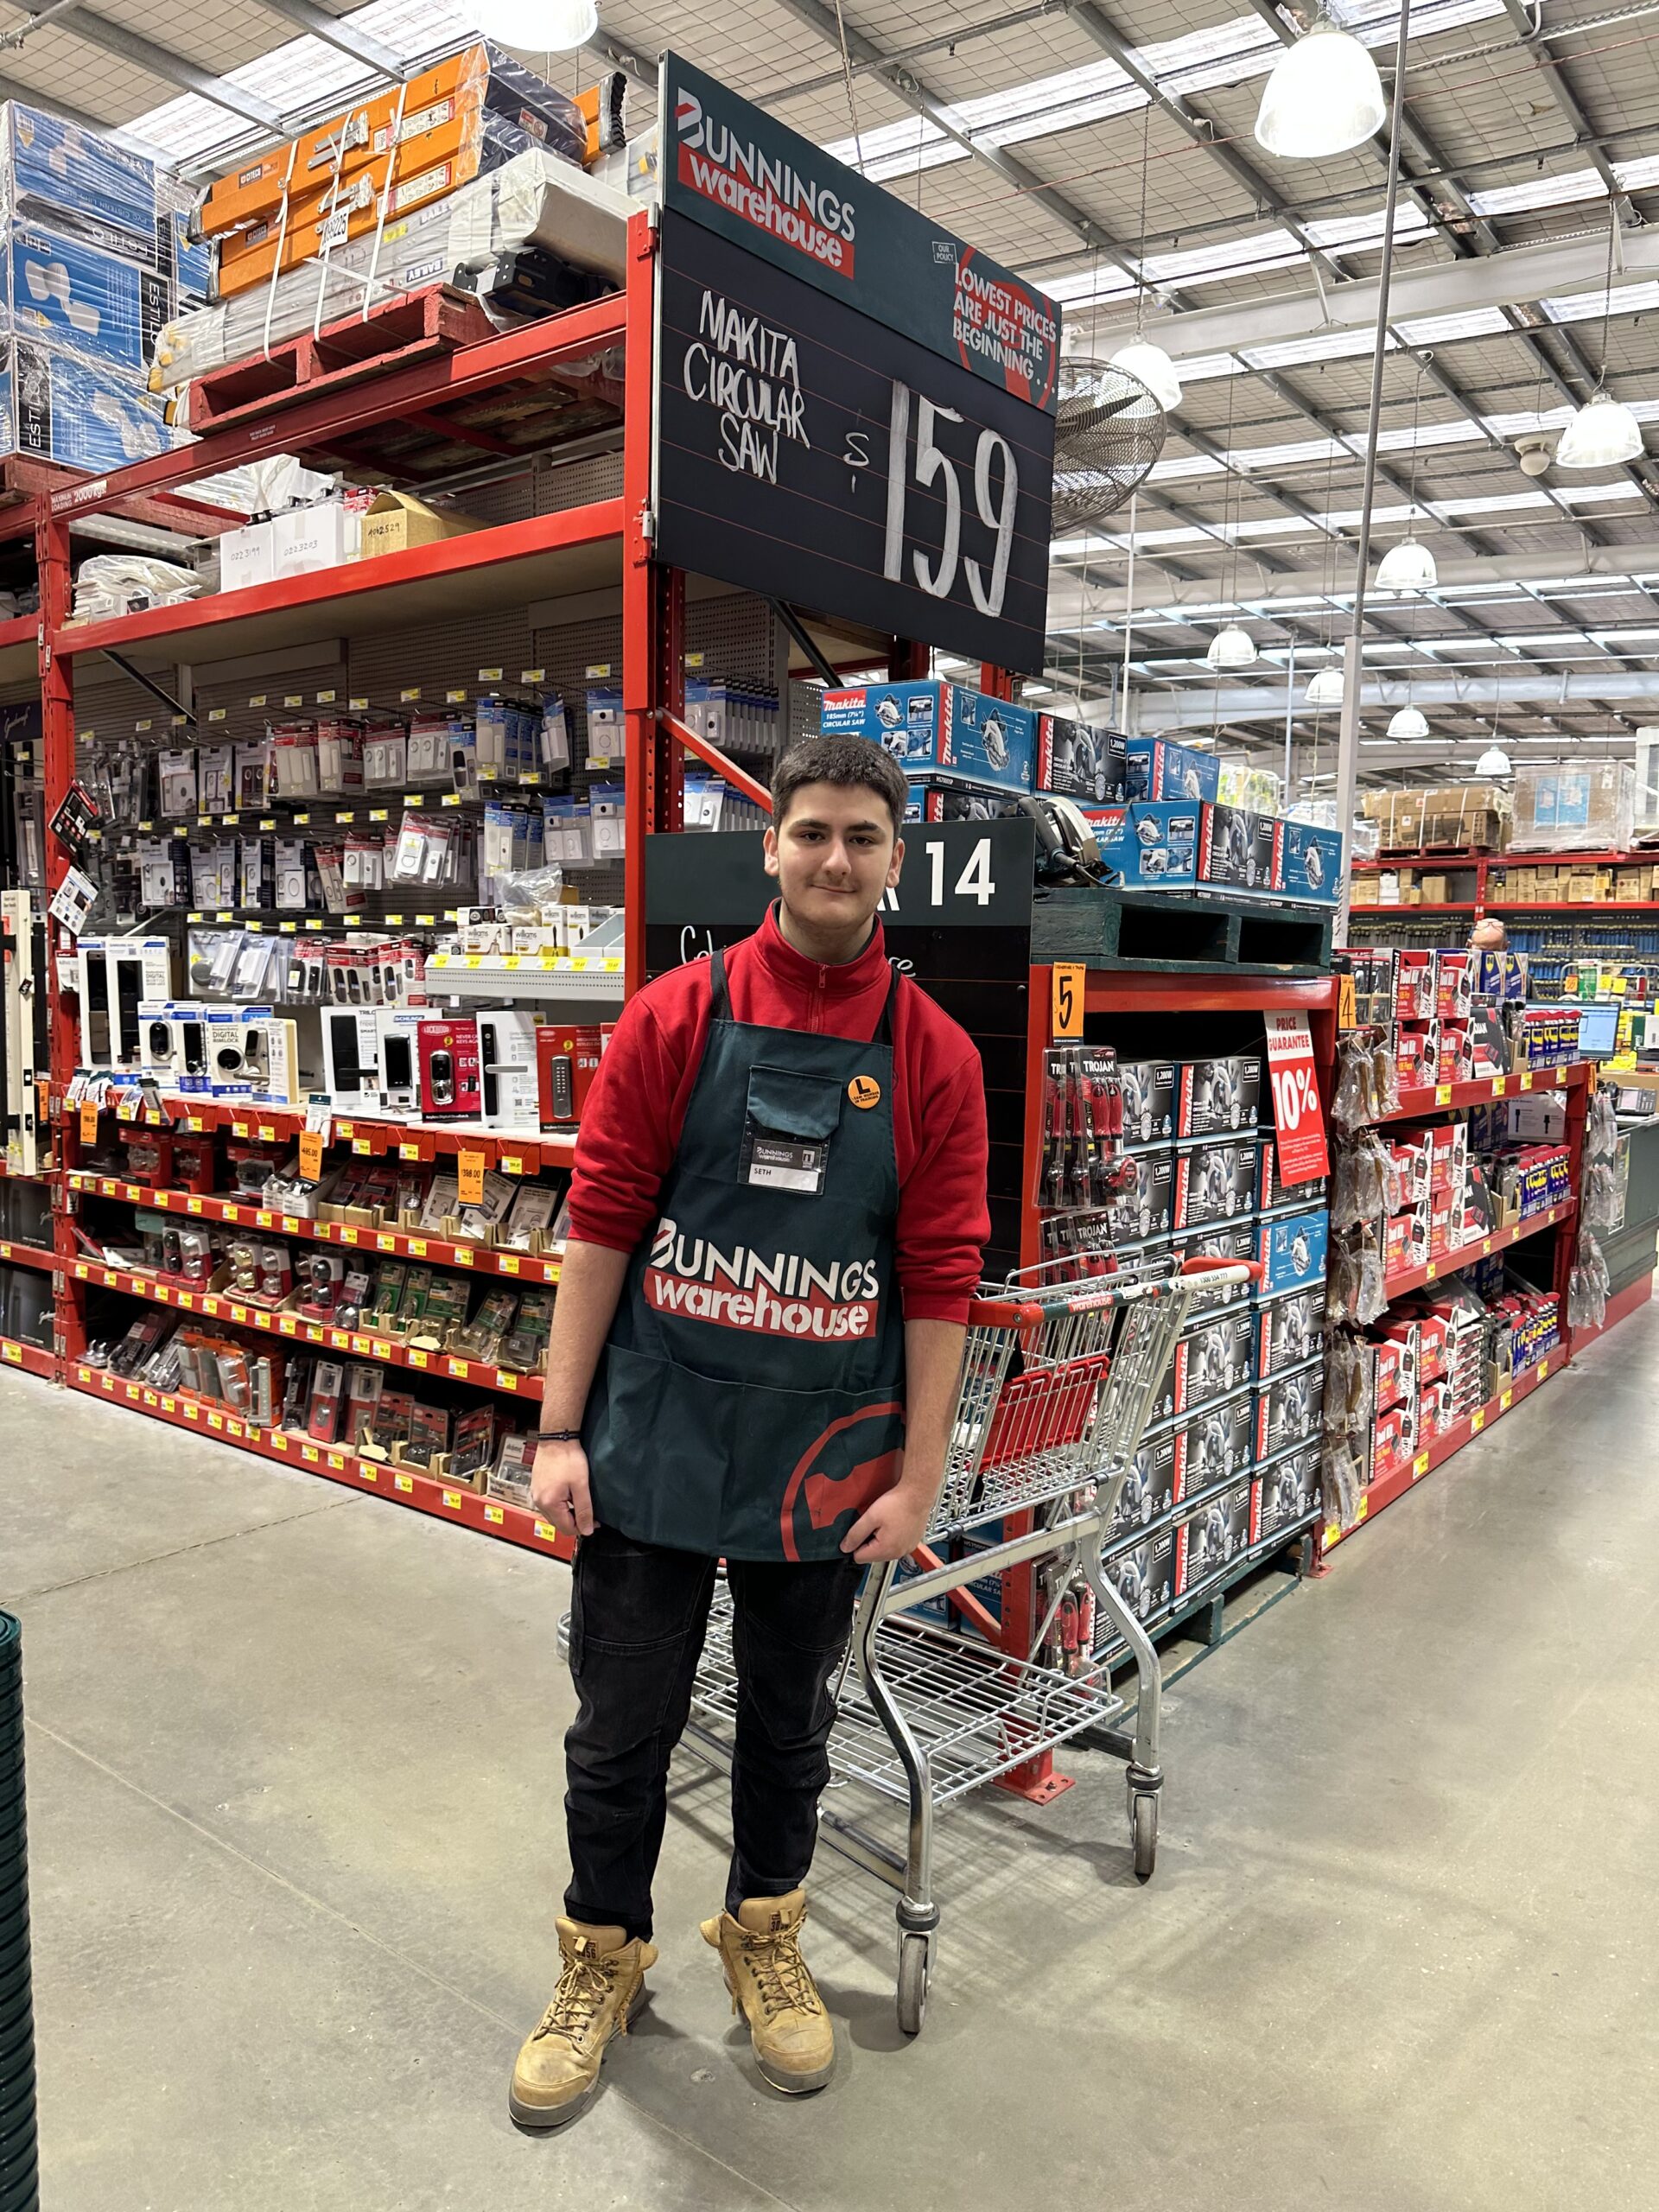 NCAT Year 10 VCE VM Work Experience and Structured Work Placement Program Bunnings Warehouse